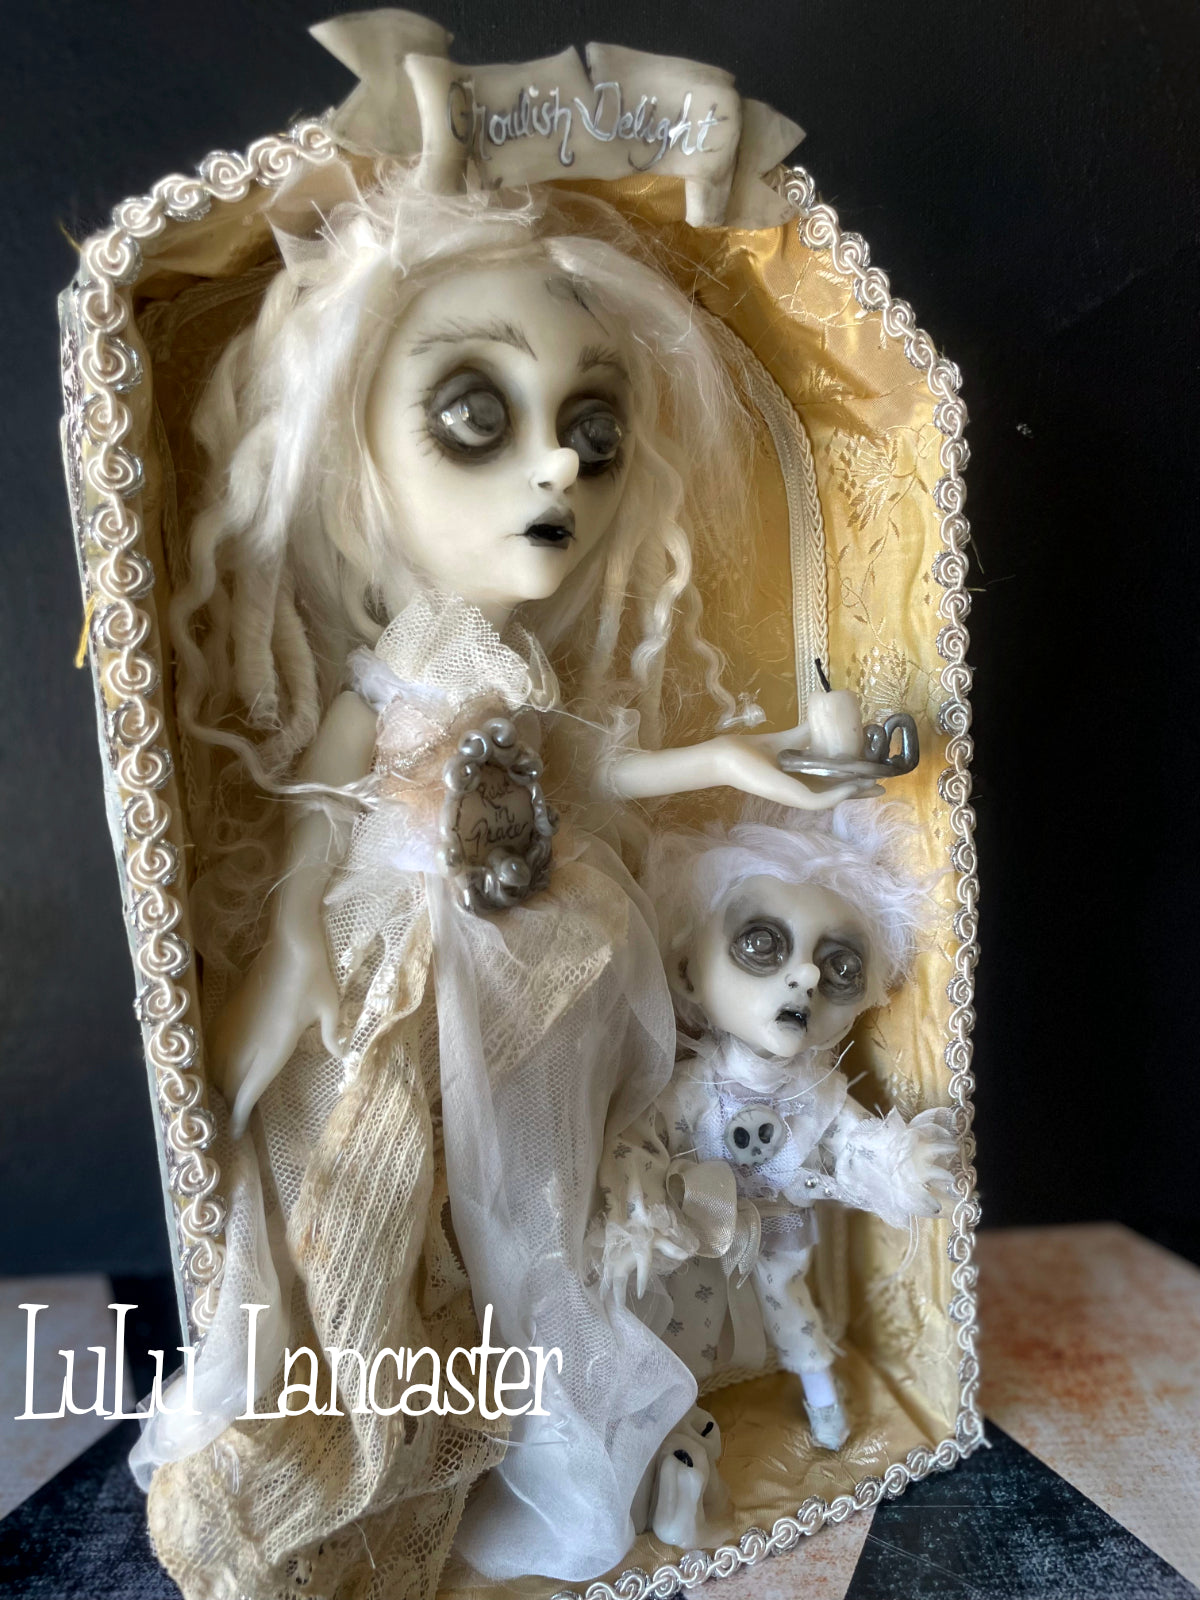 Ghoulish Delight Boxed ghosts Original LuLu Lancaster Art Doll